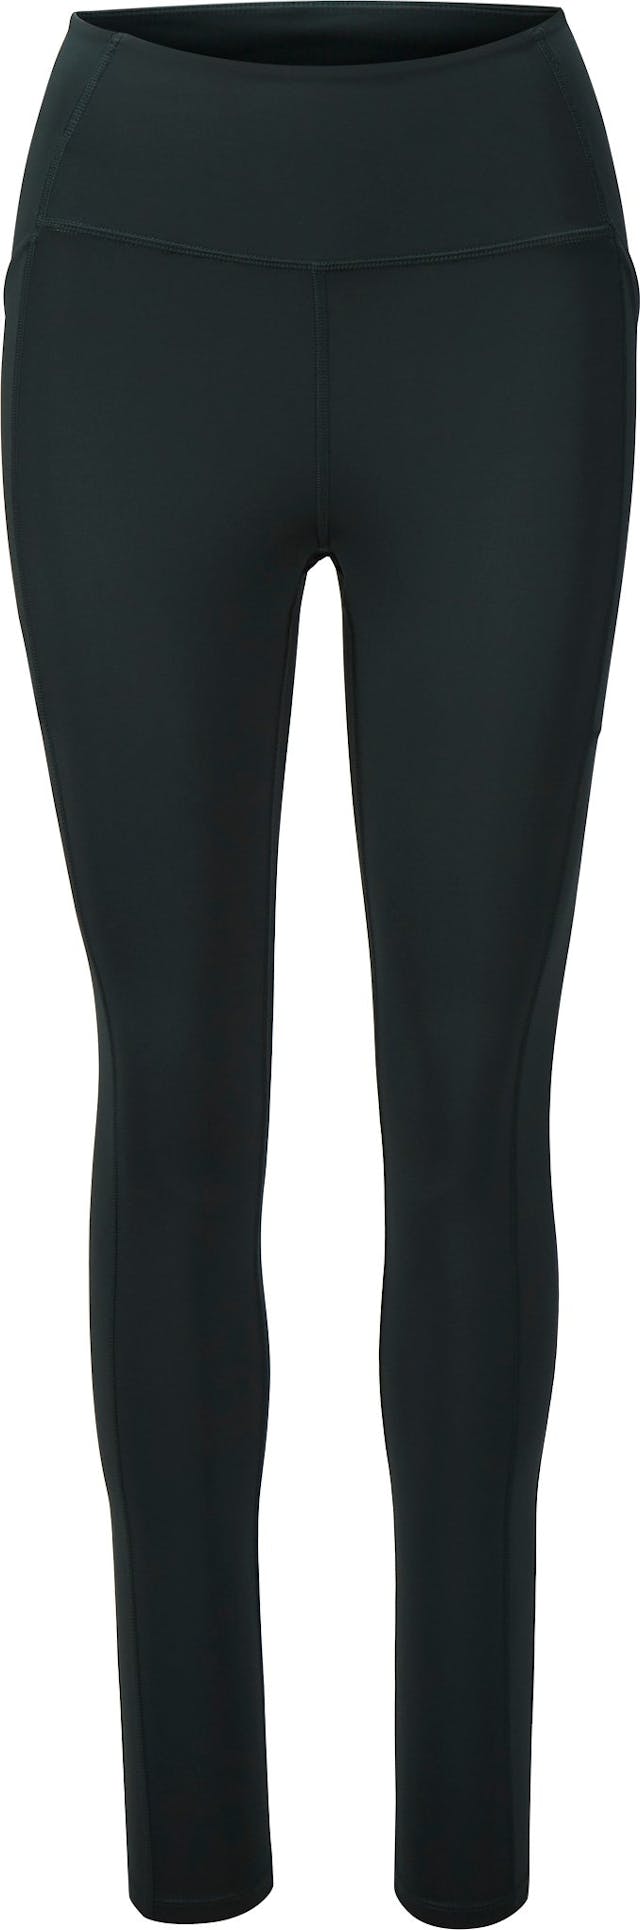 Product image for Compressive High-Rise Legging - Women's